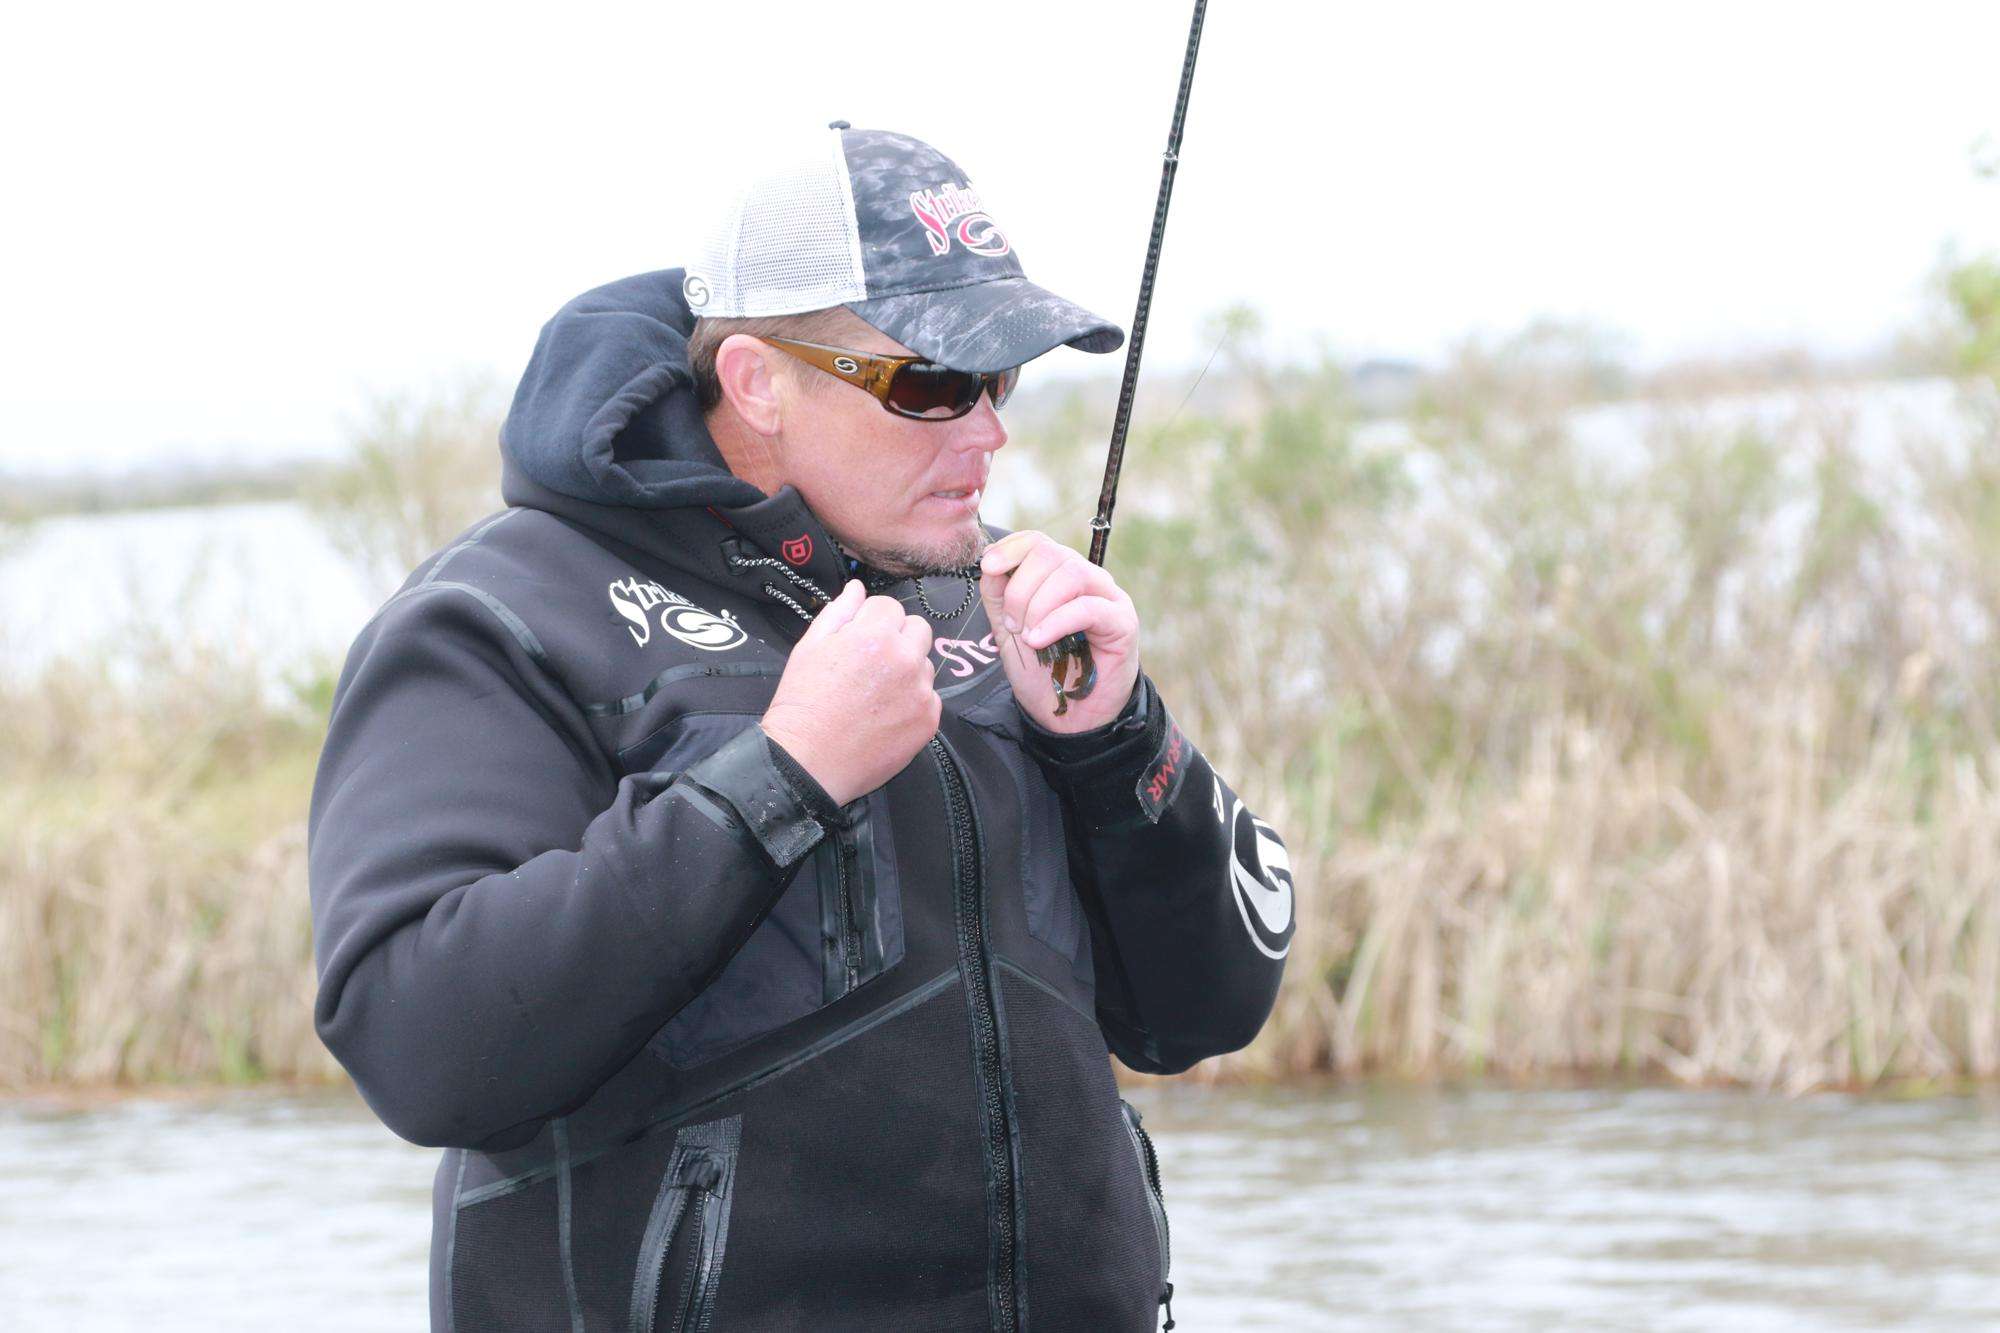 Strong knots are essential to the high-impact technique of jig fishing. Combs makes sure his connections are clean and he checks his knot after catching a few fish.